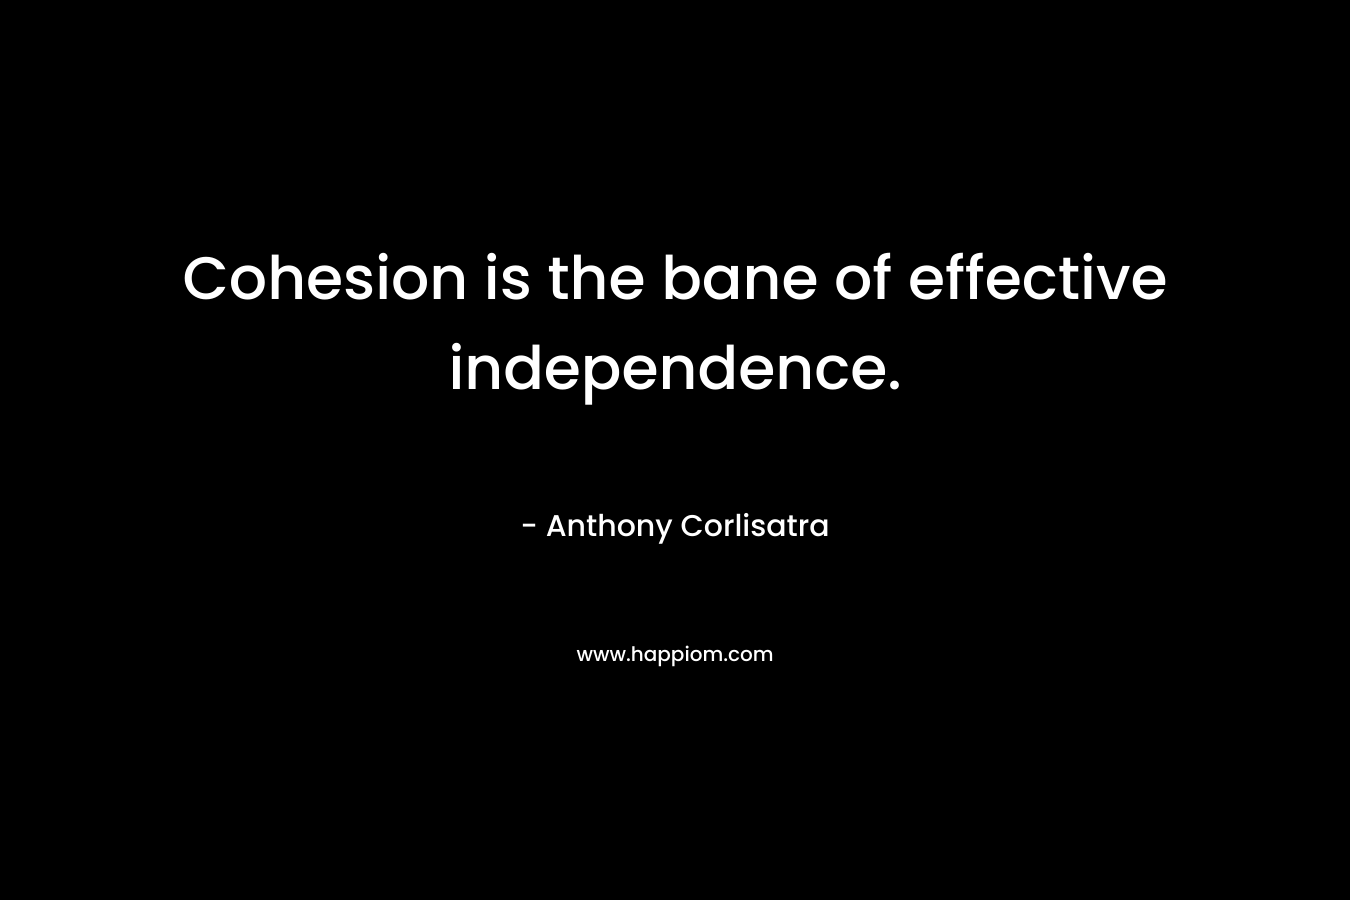 Cohesion is the bane of effective independence. – Anthony Corlisatra